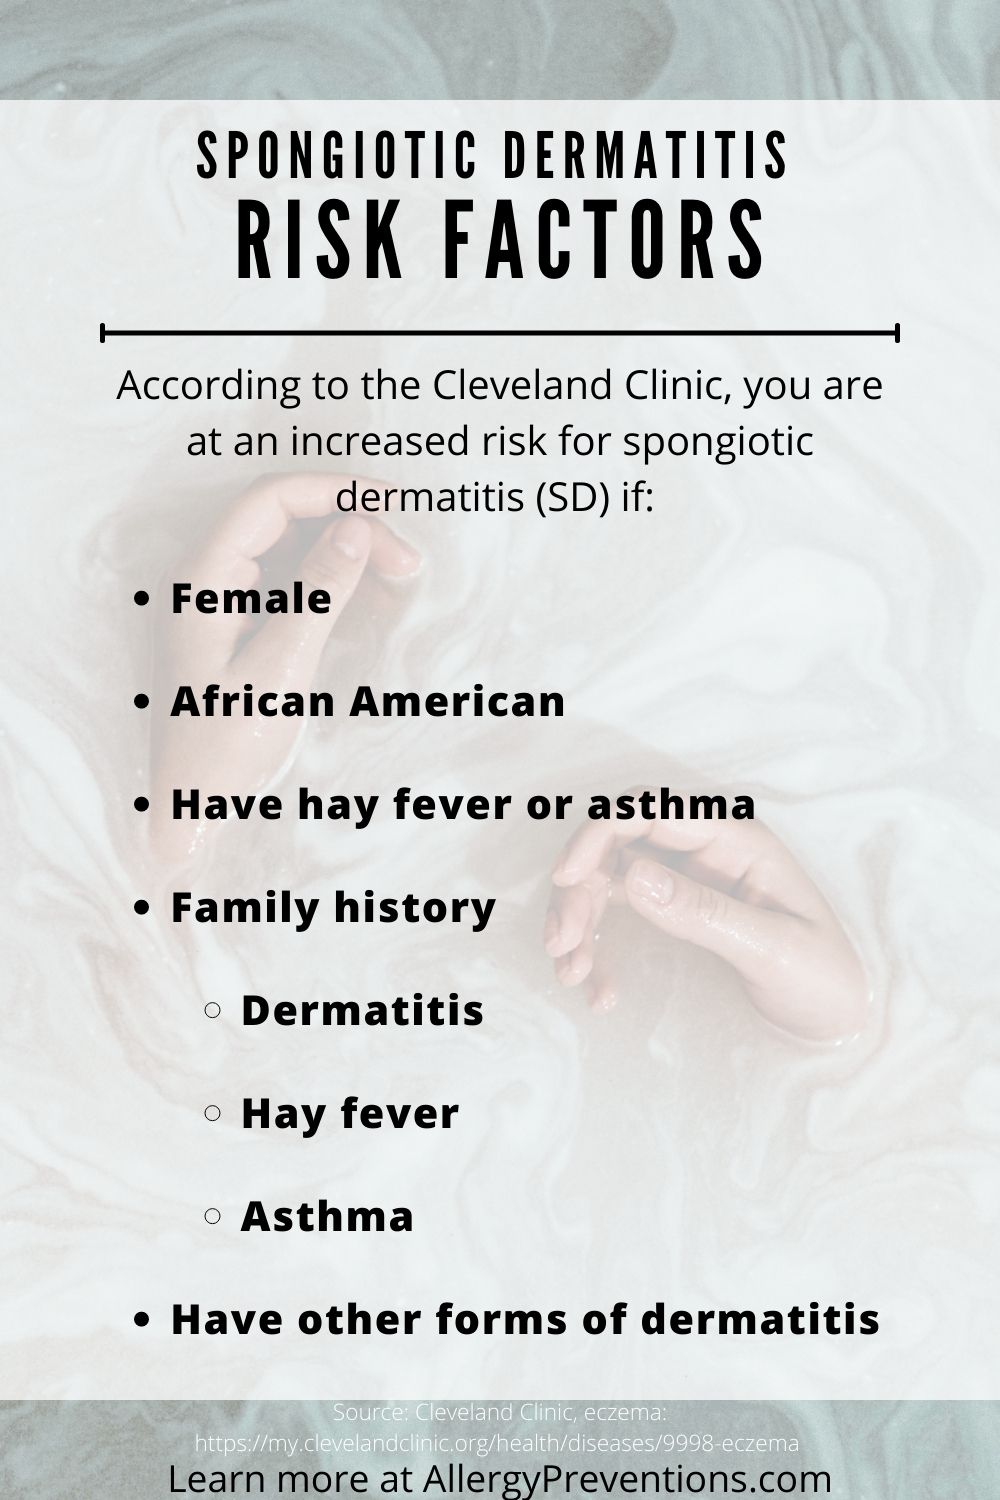 spongiotic dermatitis (SD) risk factors infographic. According to the Cleveland Clinic, you are at an increased risk for spongiotic dermatitis (SD) if:  Female
African American
Have hay fever or asthma
Family history
Dermatitis
Hay fever
Asthma
Have other forms of dermatitis
Source is the Cleveland clinic eczema article. learn more at allergypreventions.com 